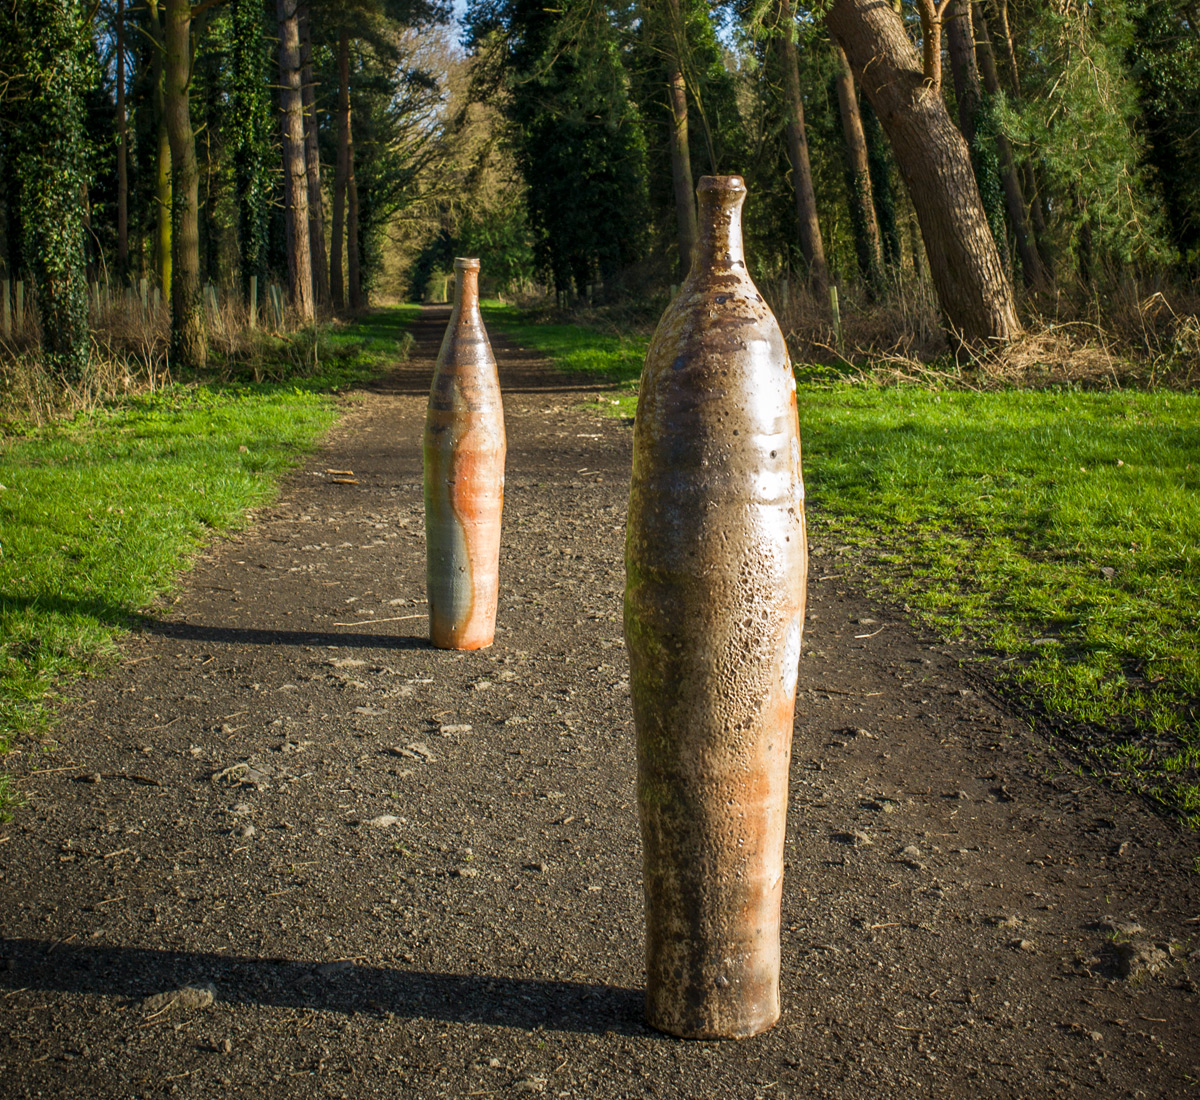 Nic Collins Tall Bottles Wood Fired Two Featured Ceramics | Tall Wood-Fired Bottles by Nic Collins